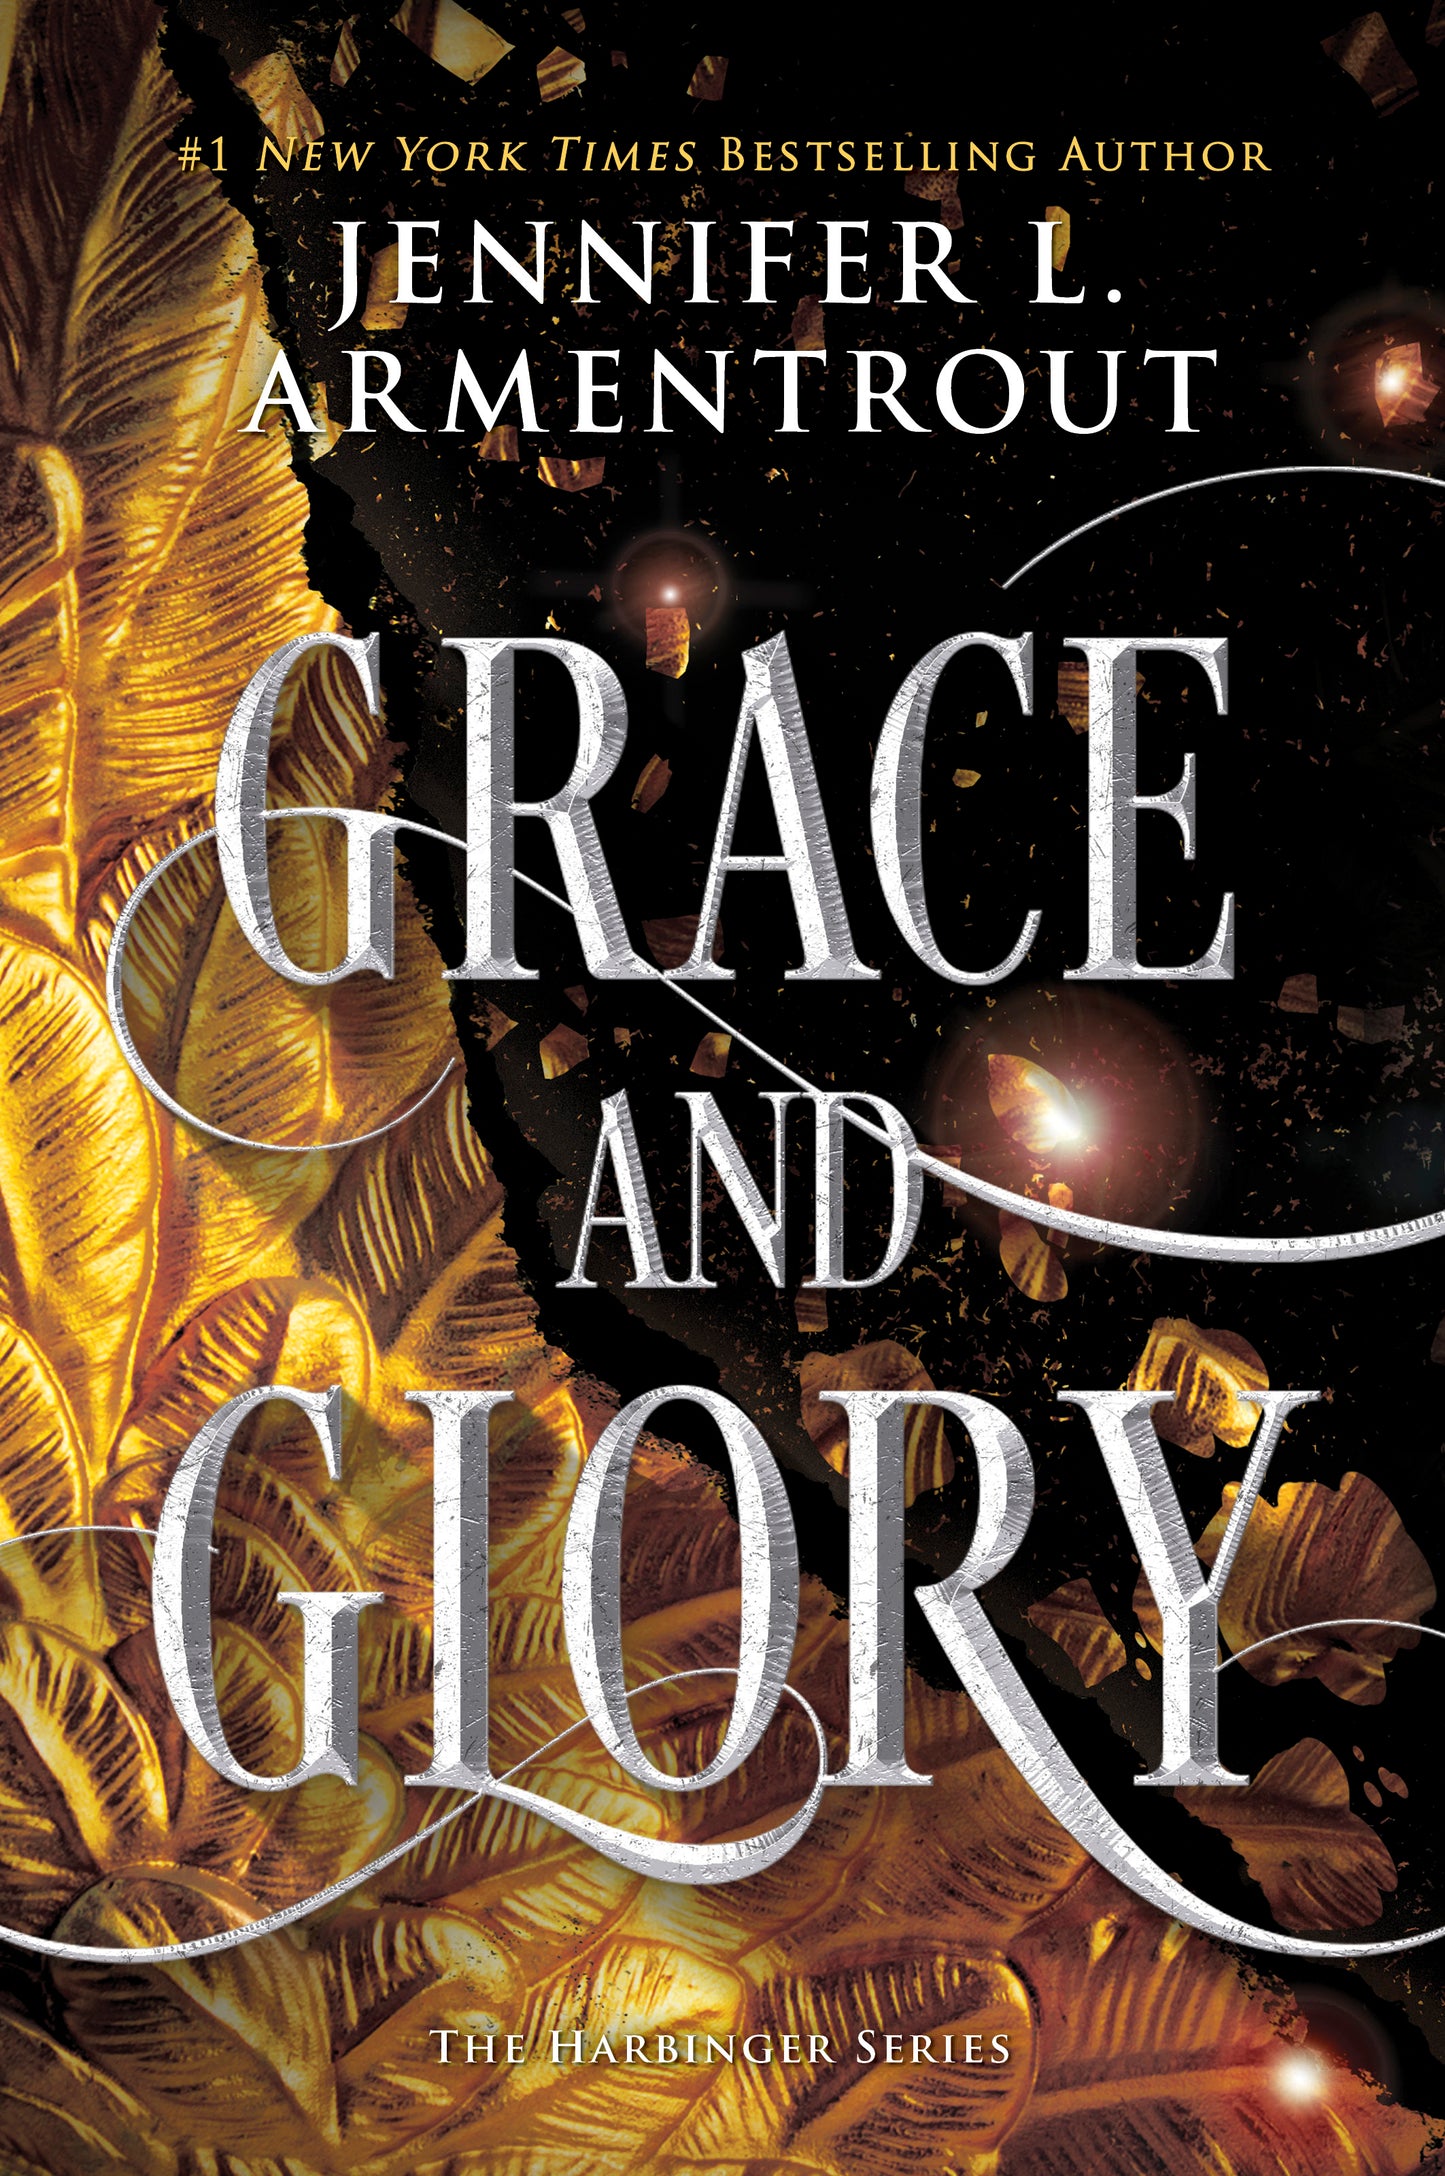 Grace and Glory (The Harbinger #3) by Jennifer L. Armentrout